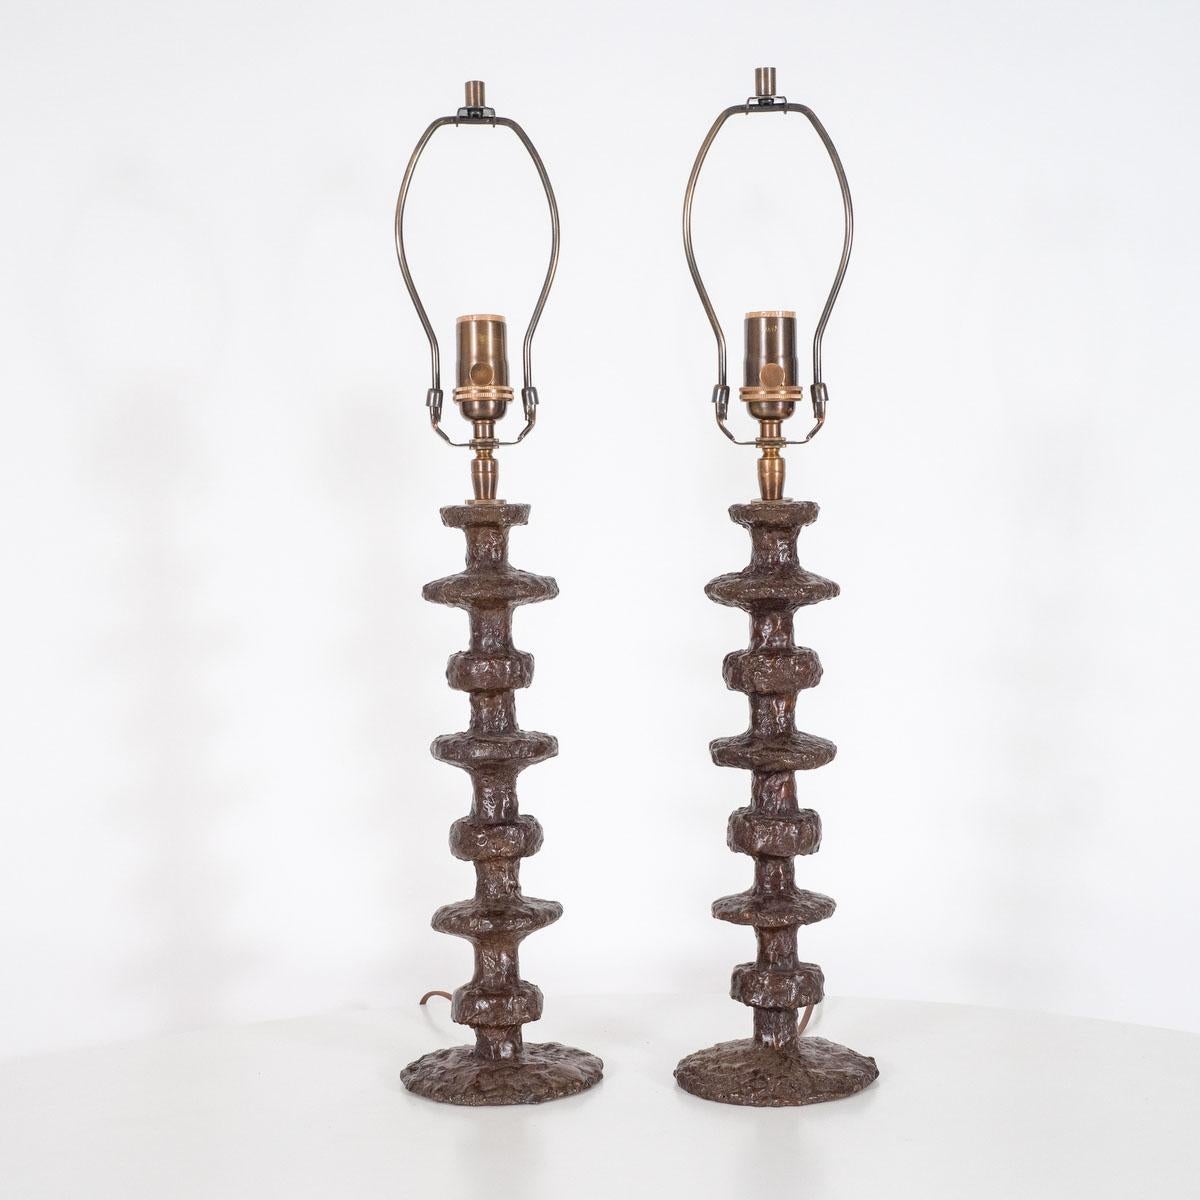 Organic Modern Pair of Turned Bronze Table Lamps by Claudio Gonzalez